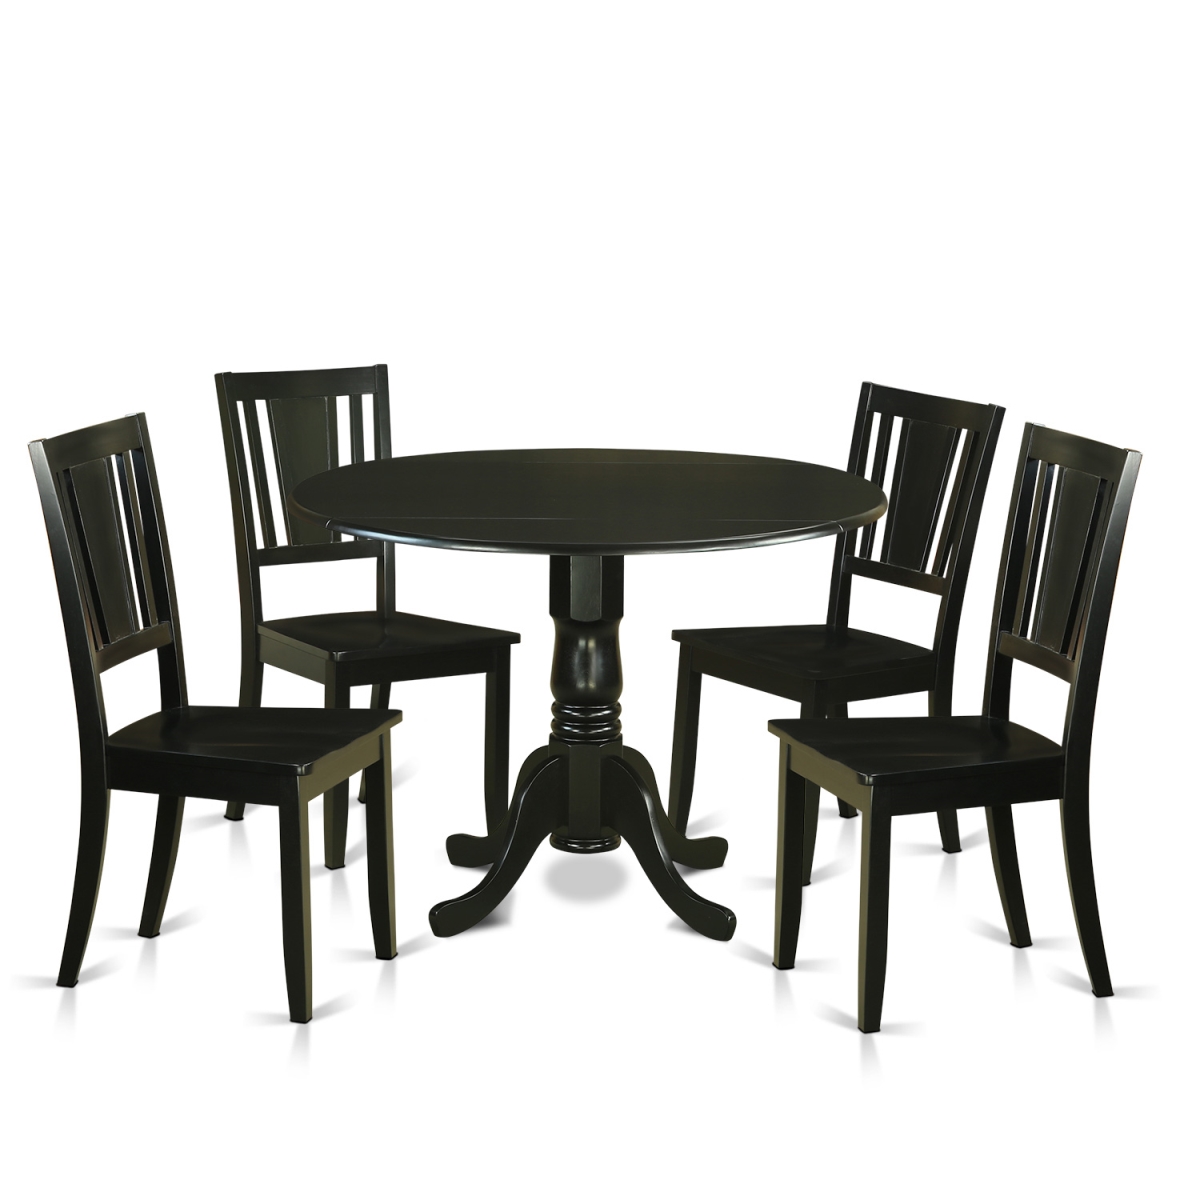 Picture of East West Furniture DLDU5-BLK-W Dining Room Table Set with 4 Small Kitchen Table & 4 Chairs, Black - 5 Piece